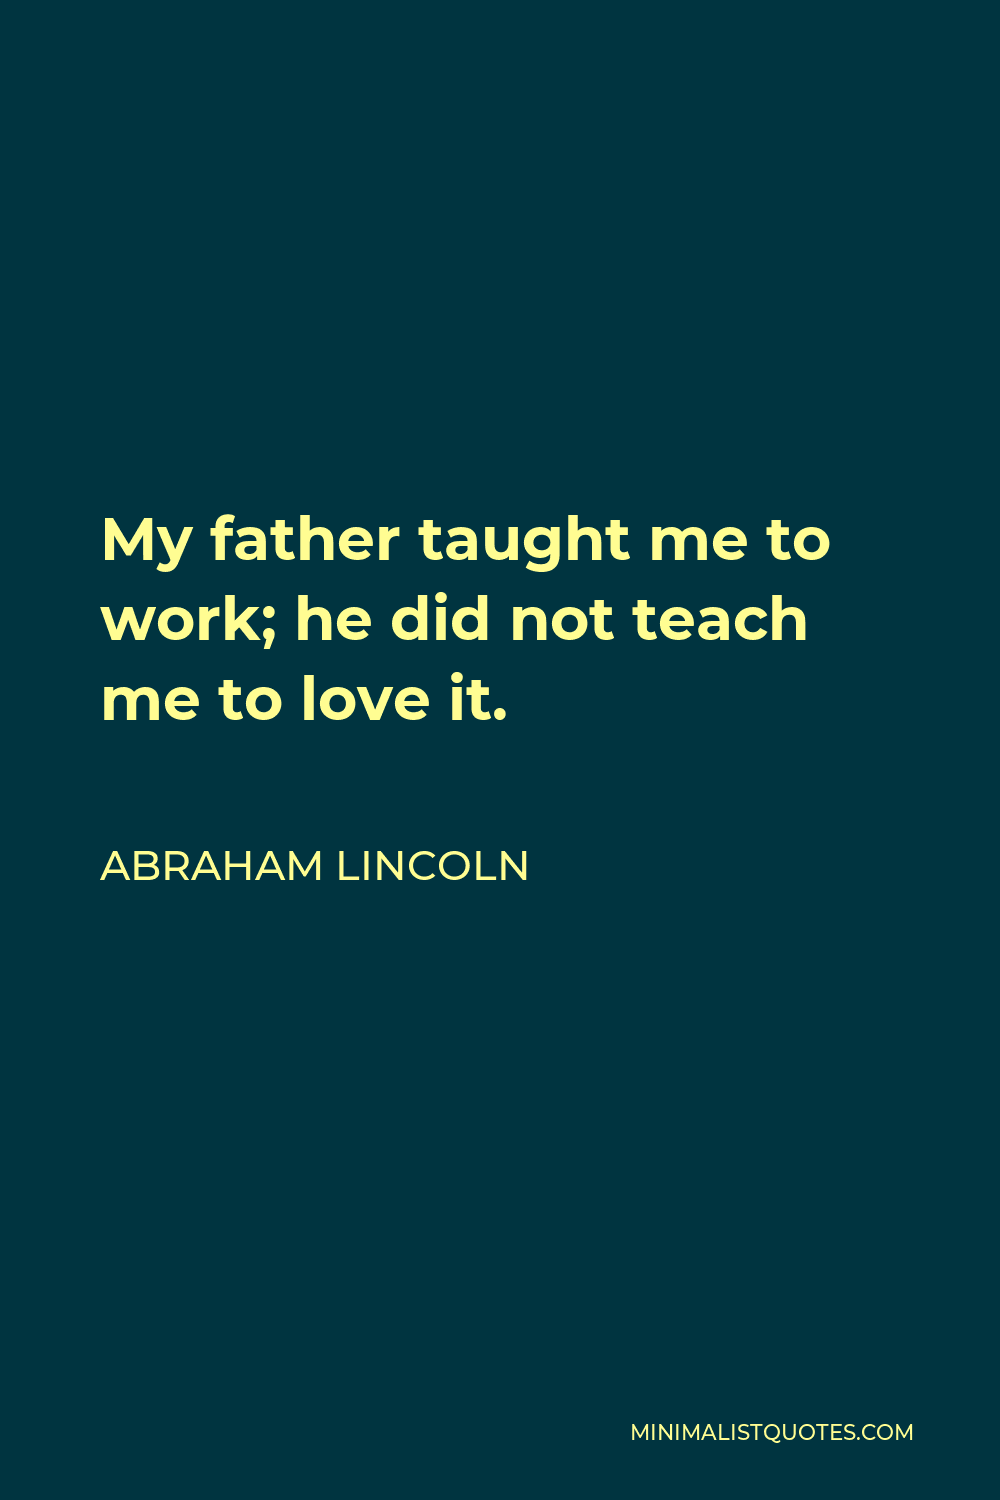 Abraham Lincoln Quote - My father taught me to work; he did not teach me to love it.